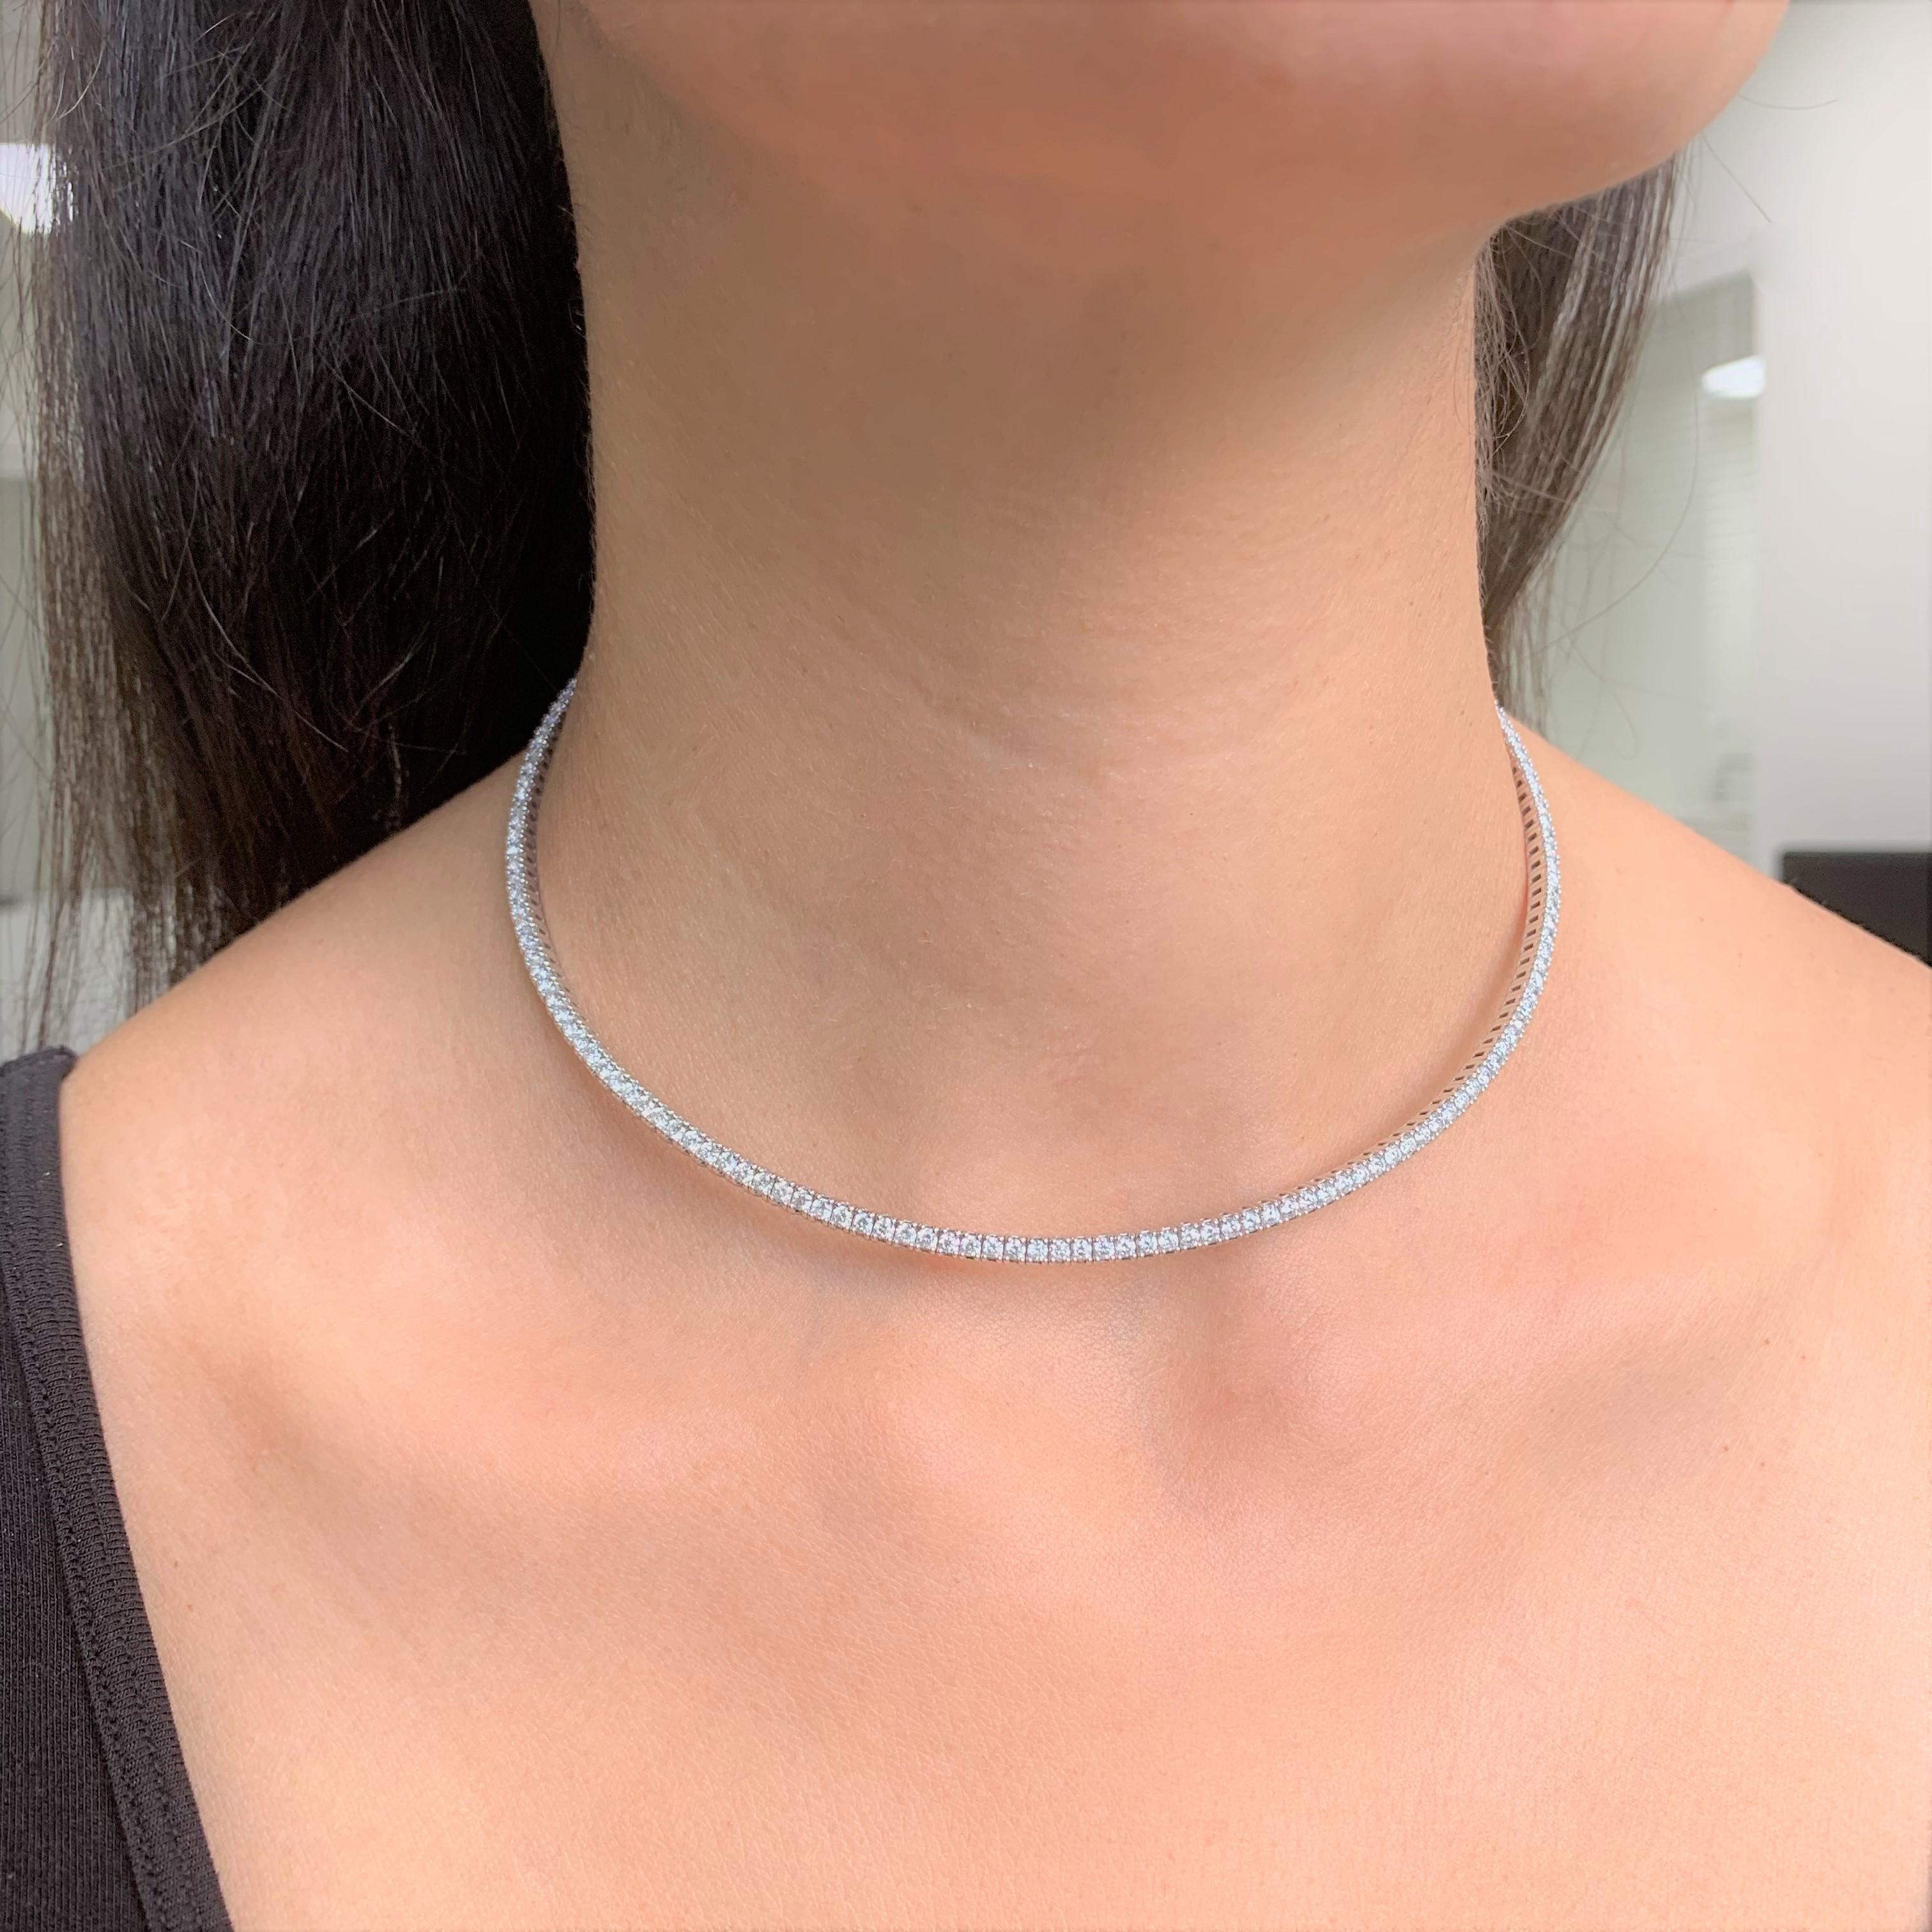 18 Karat White Gold 5.28 Carat Diamond Choker Necklace In New Condition For Sale In Great neck, NY